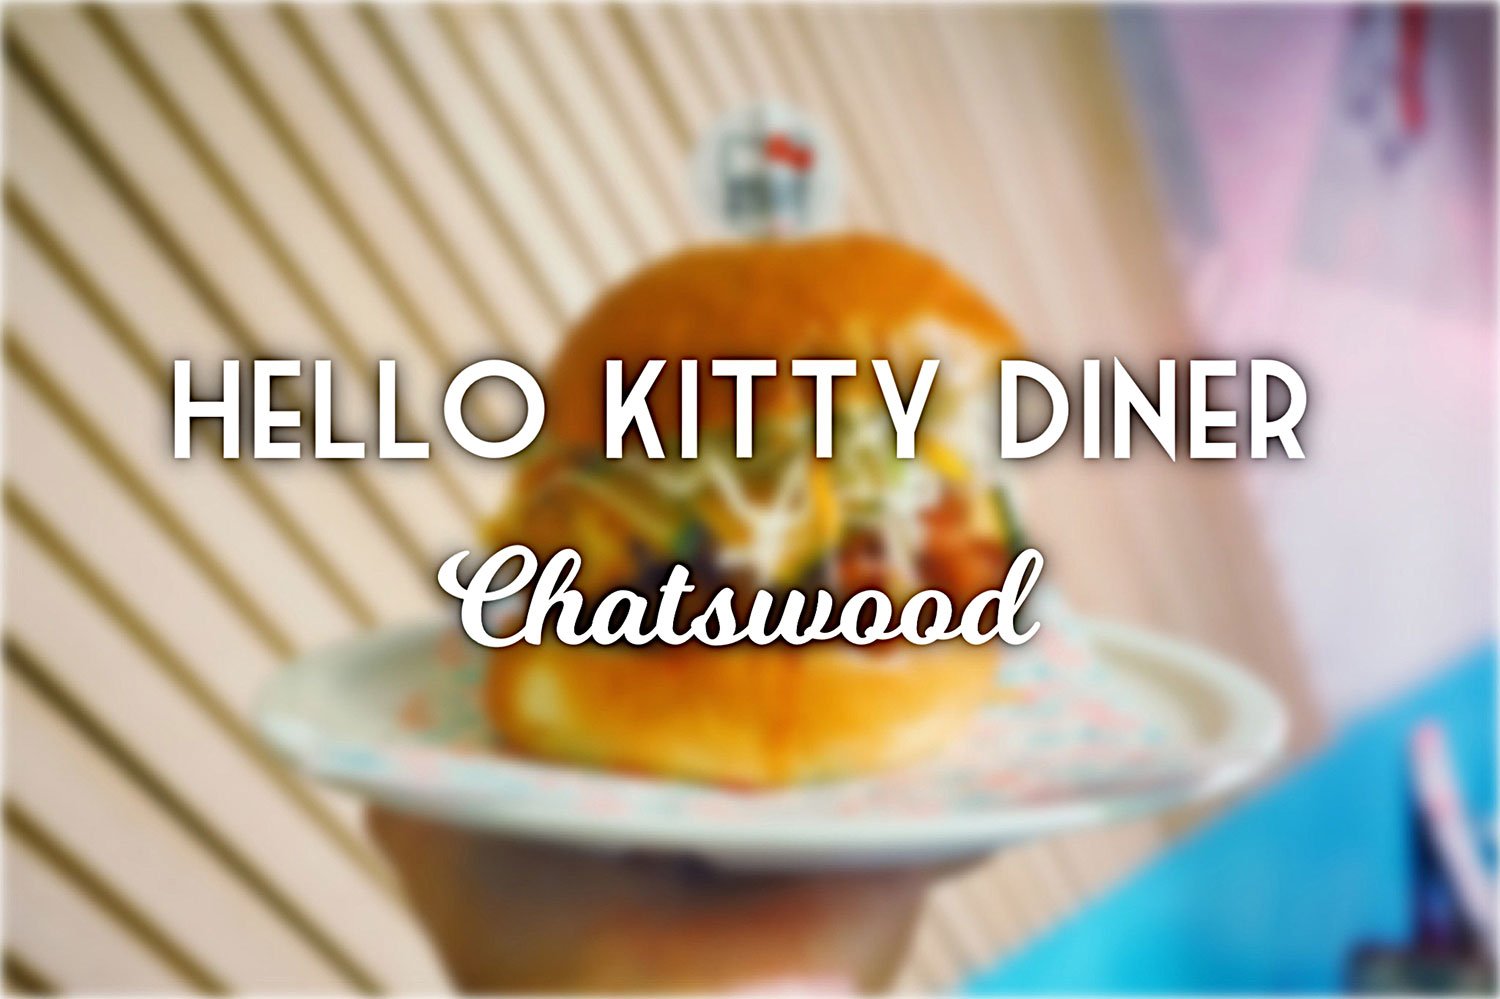 Sydney Food Blog Review of Hello Kitty Diner, Chatswood